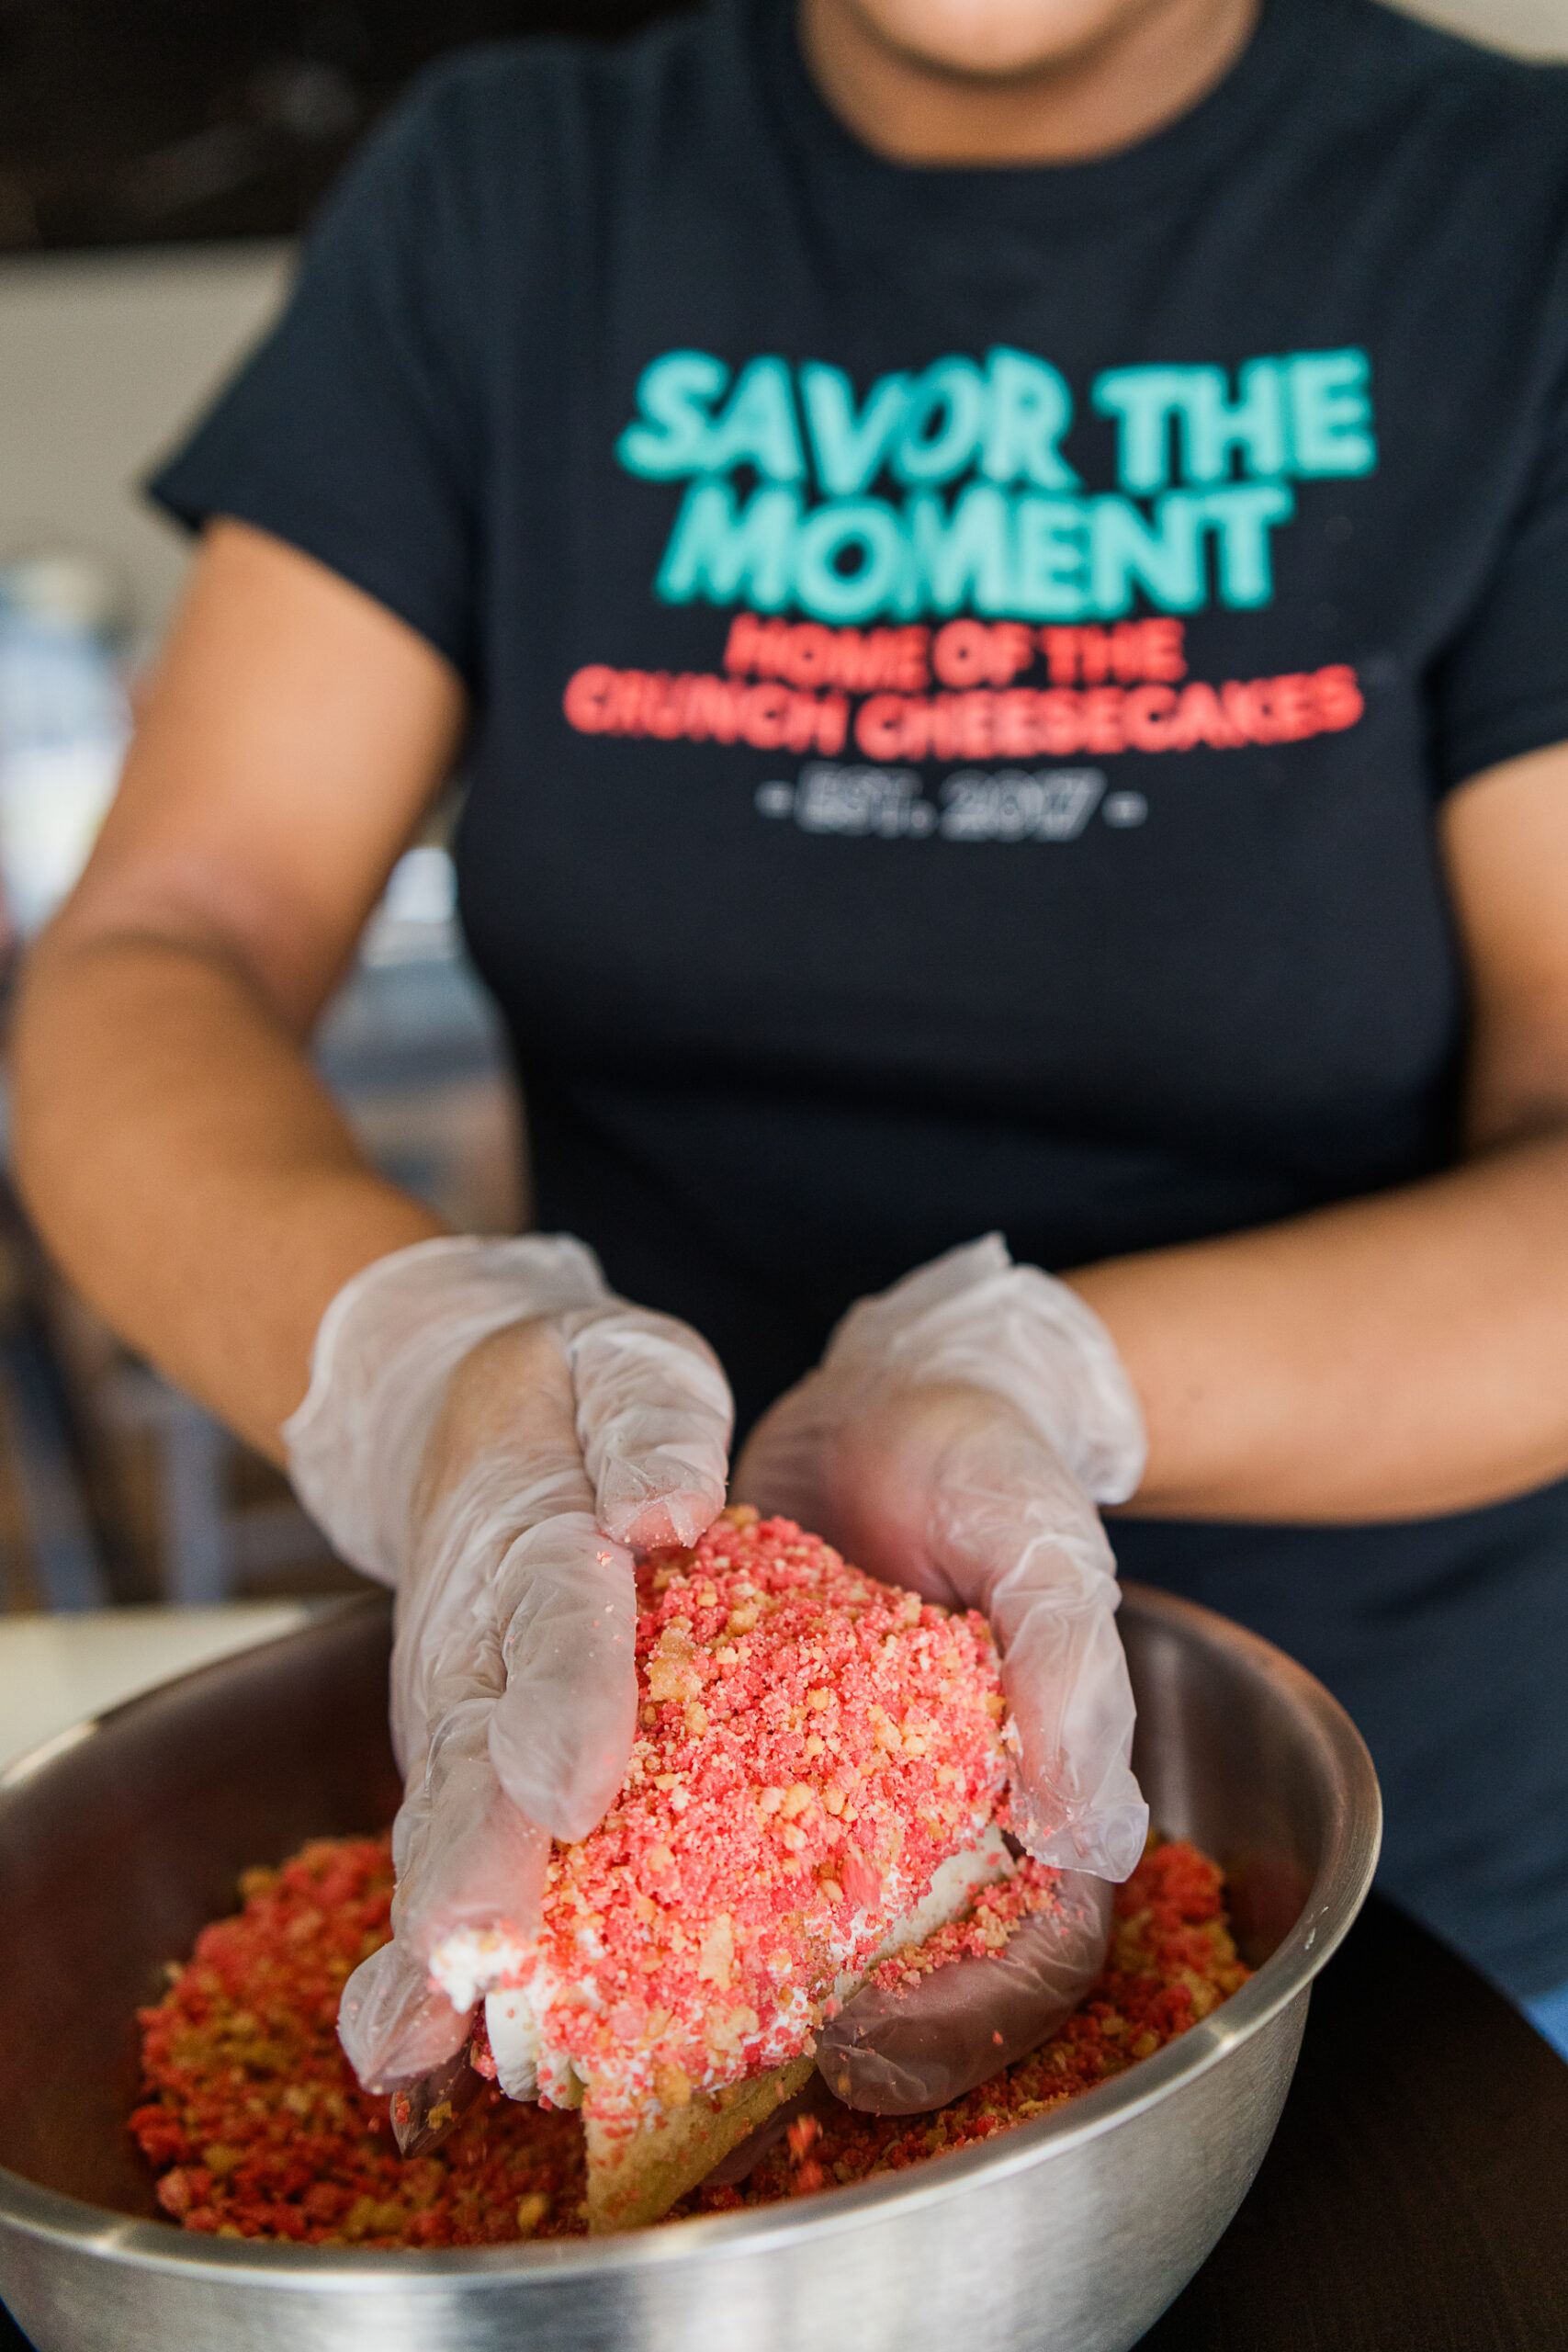 employee making Crunch Cheesecake at Savor the Moment in High Point, NC.